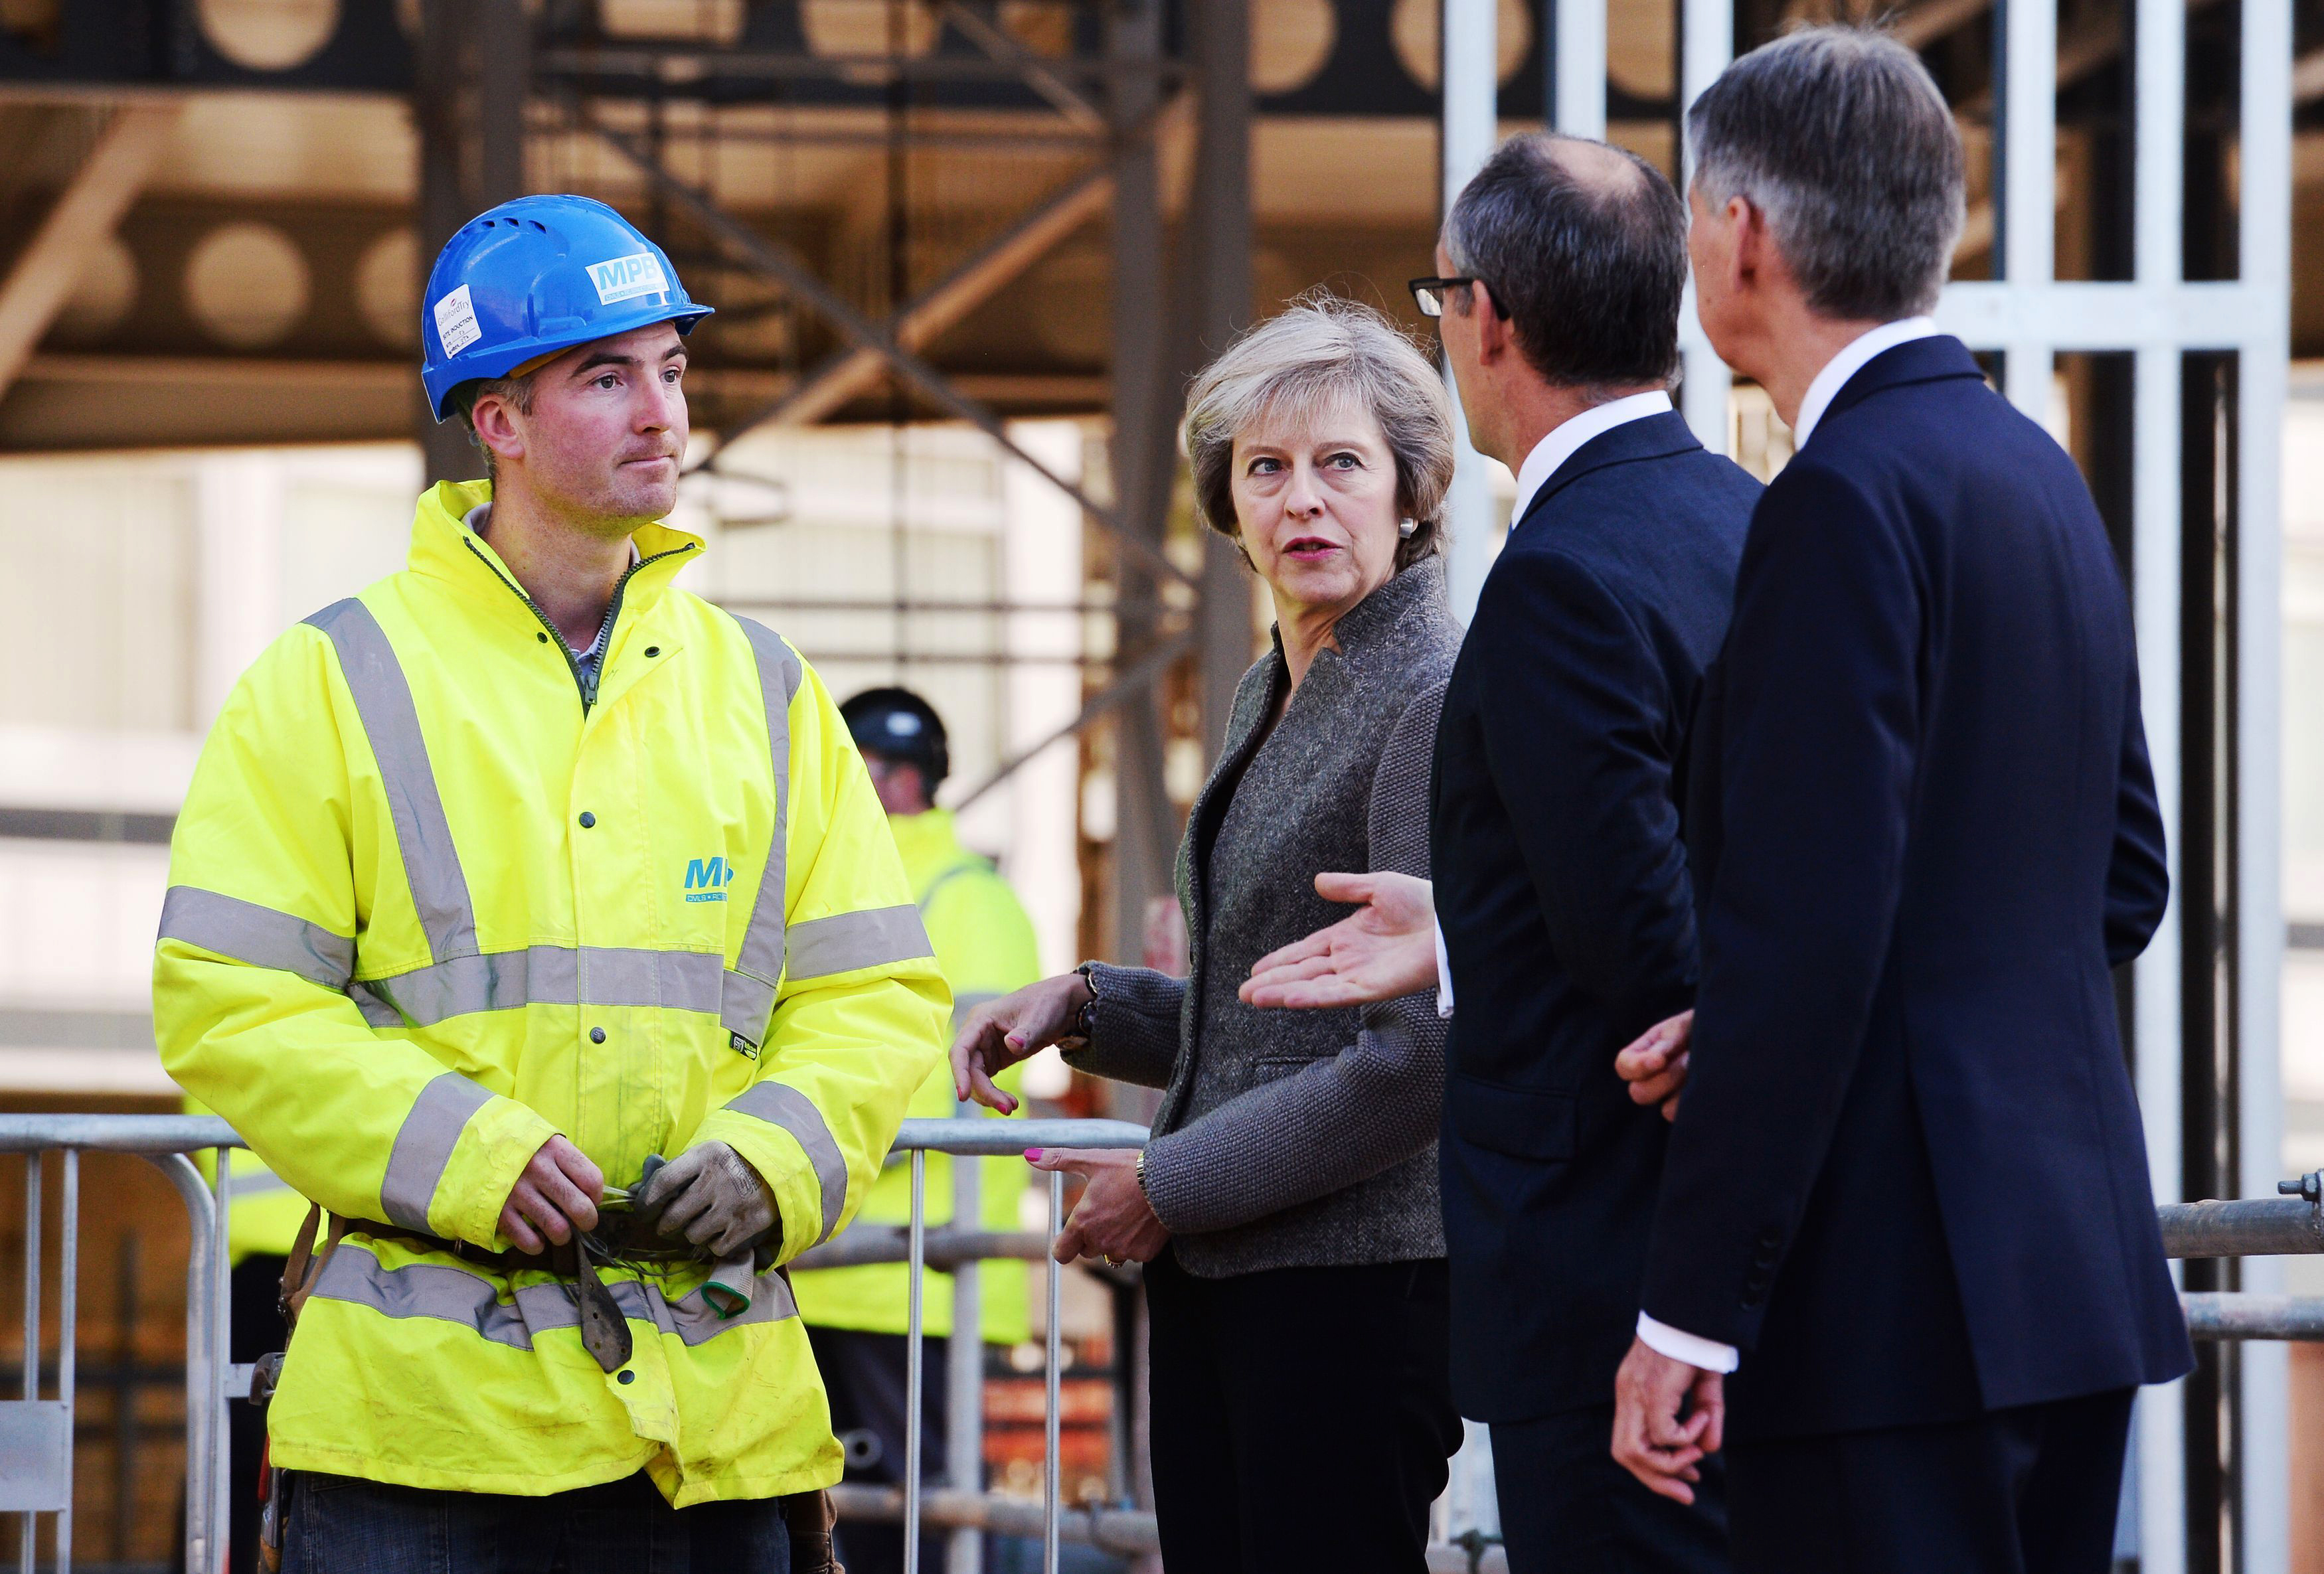 Britain's Prime Minister Theresa May and Chancellor of the Exchequer Philip Hammond, right, during a visit to a construction site in Birmingham, England, where new HSBC bank offices are being built, Monday Oct. 3, 2016. May announced Sunday a timetable for Britain's exit from the European Union, and Treasury chief Hammond warned on Monday of turbulence in the coming years as Britain negotiates its exit from the trading bloc. (Stefan Rousseau / PA via AP)